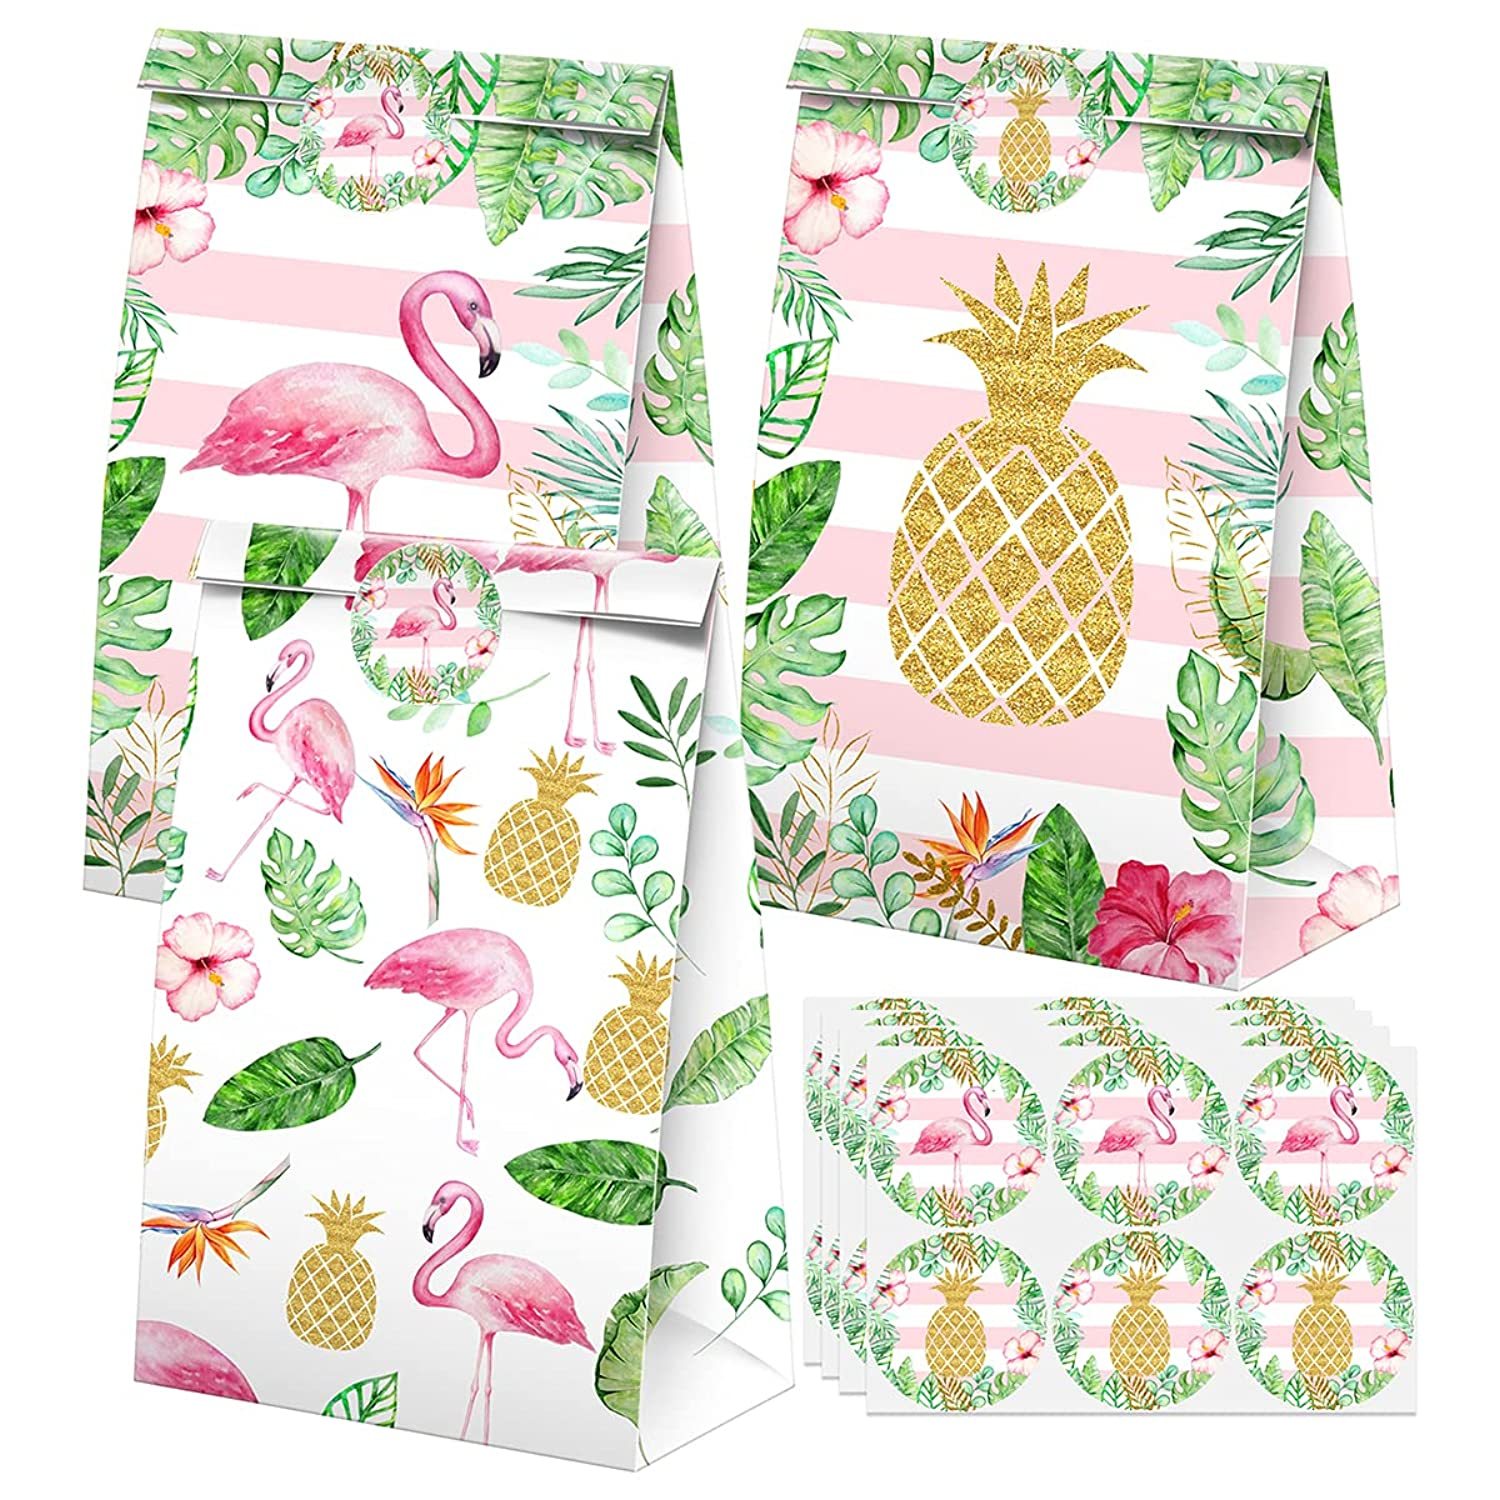 Flamingo Party Favors Candy Bags With Stickers - Pine Goodie Gift Trea